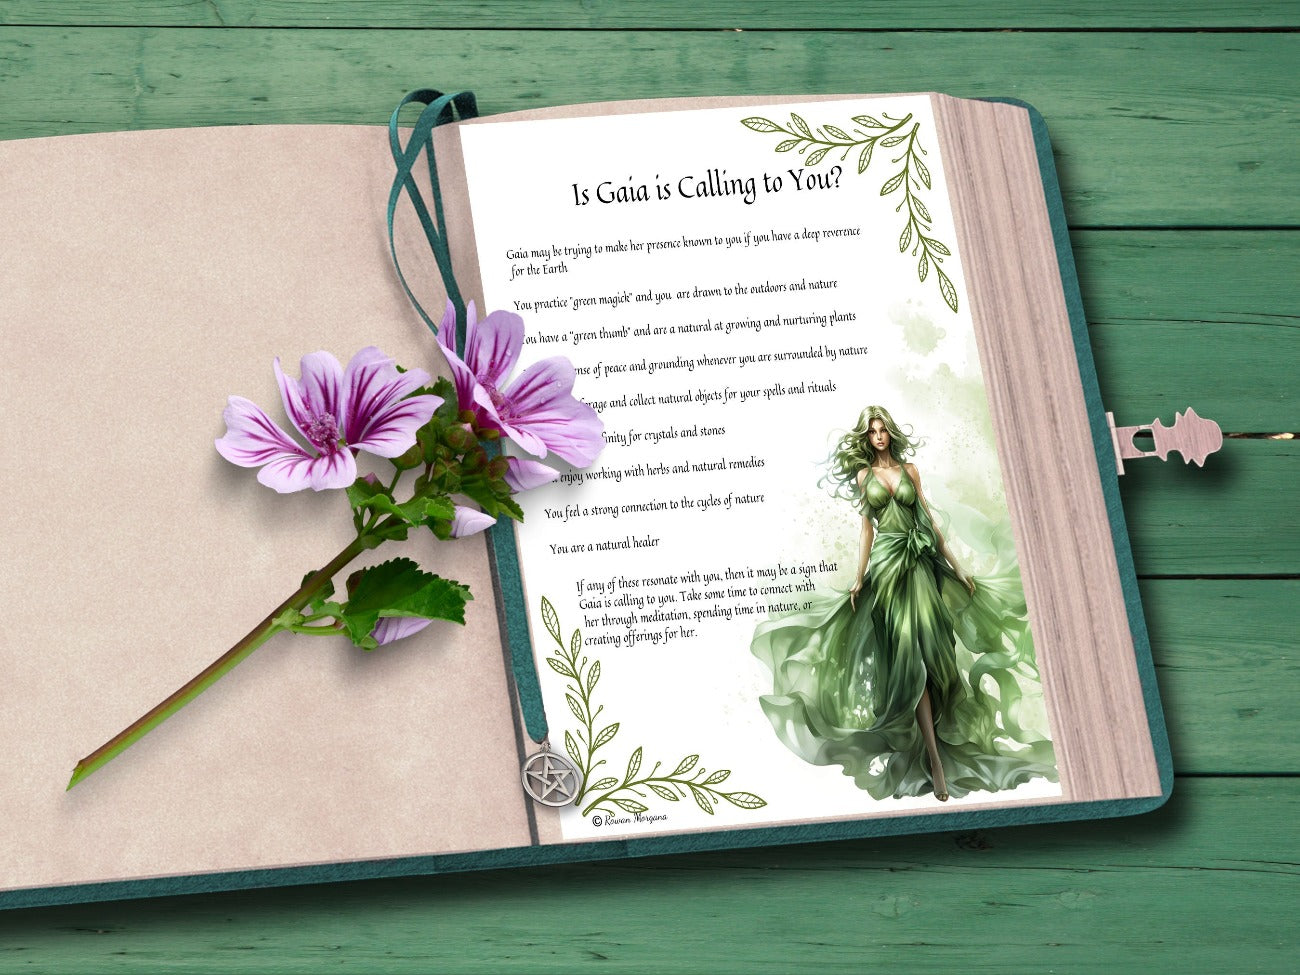 GODDESS GAIA, Is Gaia Calling to You? page placed in an open spellbook with a flower placed on the pages - Morgana Magick Spell